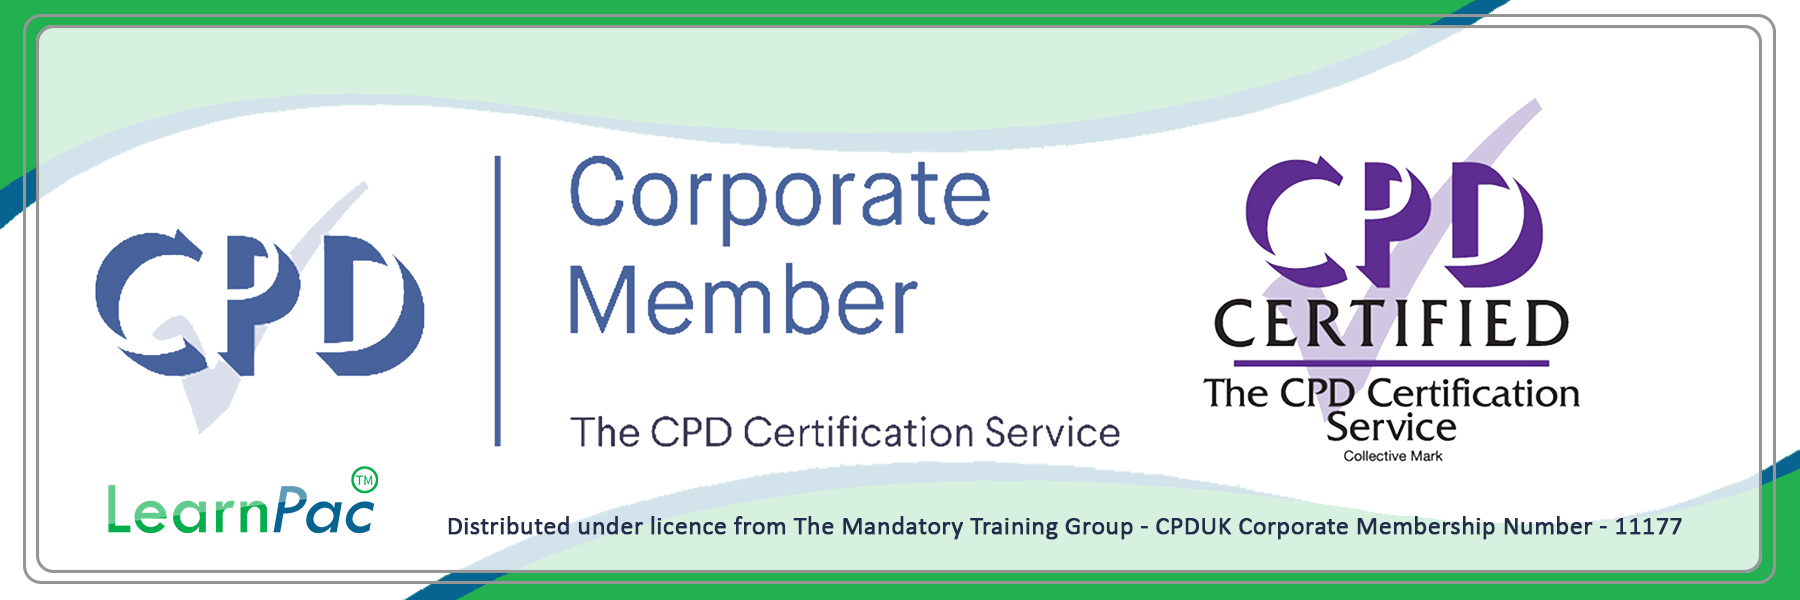 Marketing your Nursery Setting - Online Training Course - CPDUK Certified - Learnpac System UK -